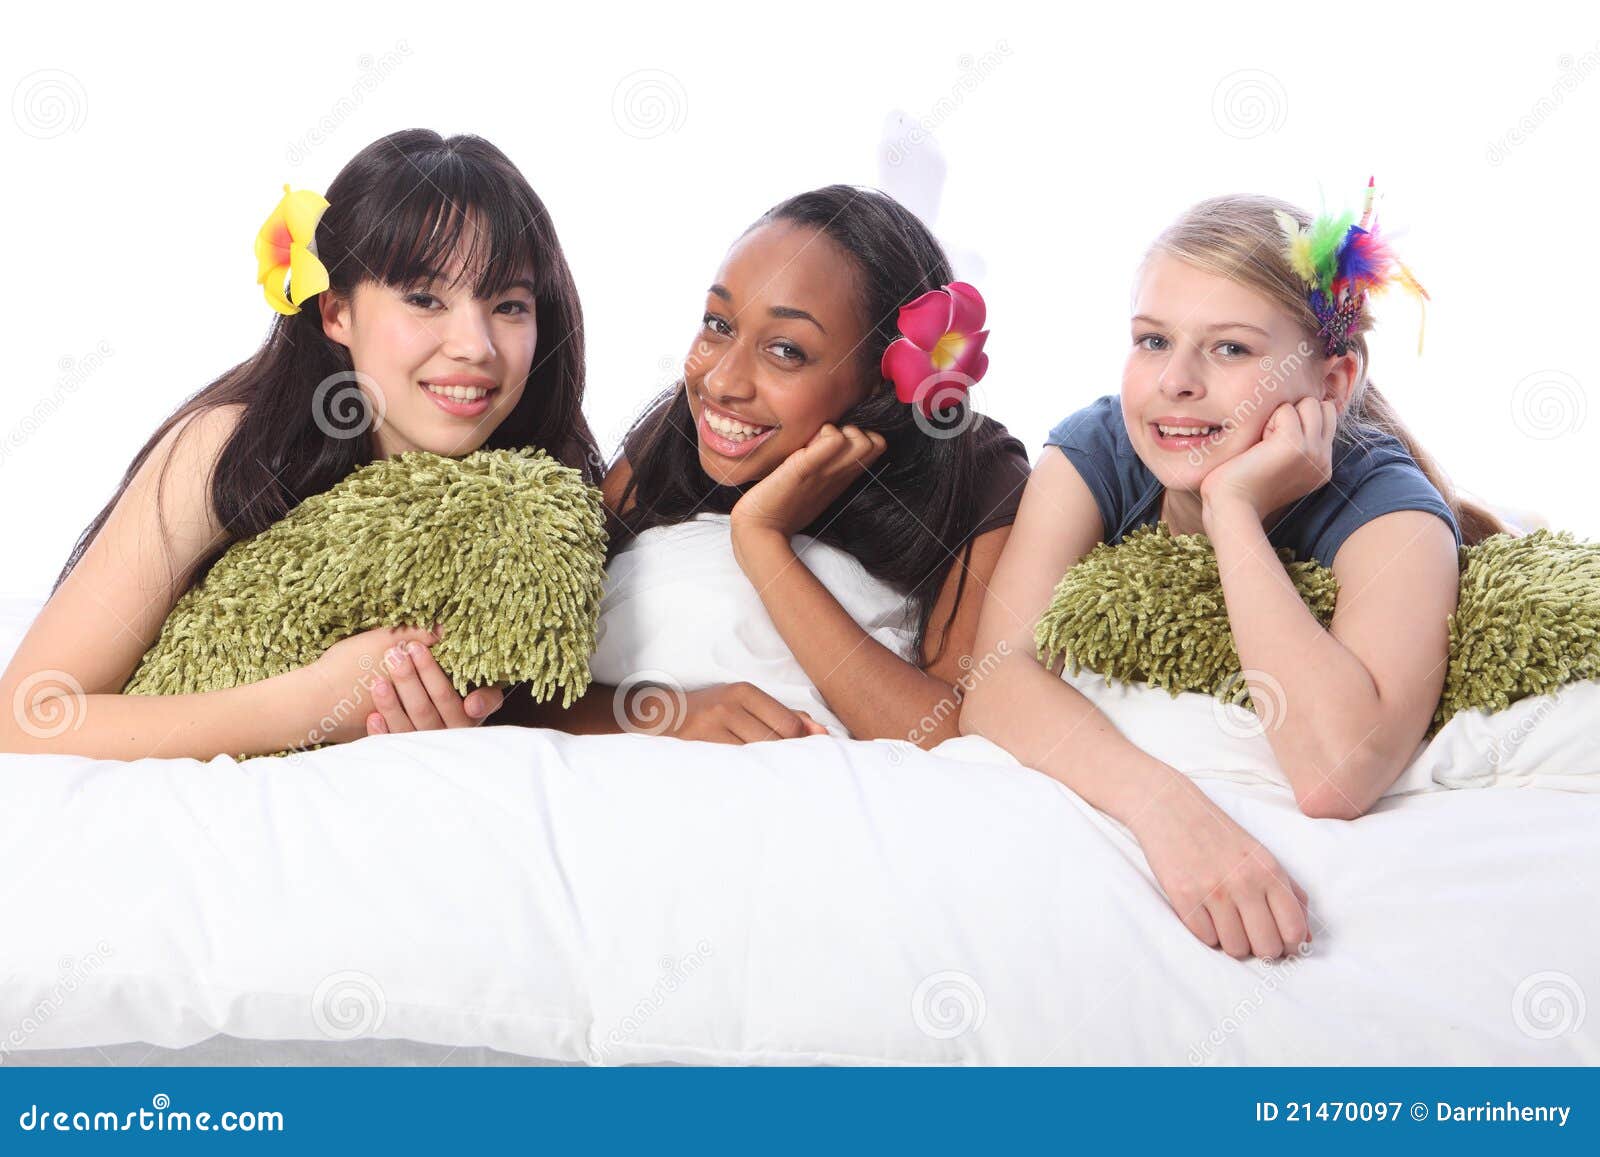 teenage girls slumber party with hair accessories